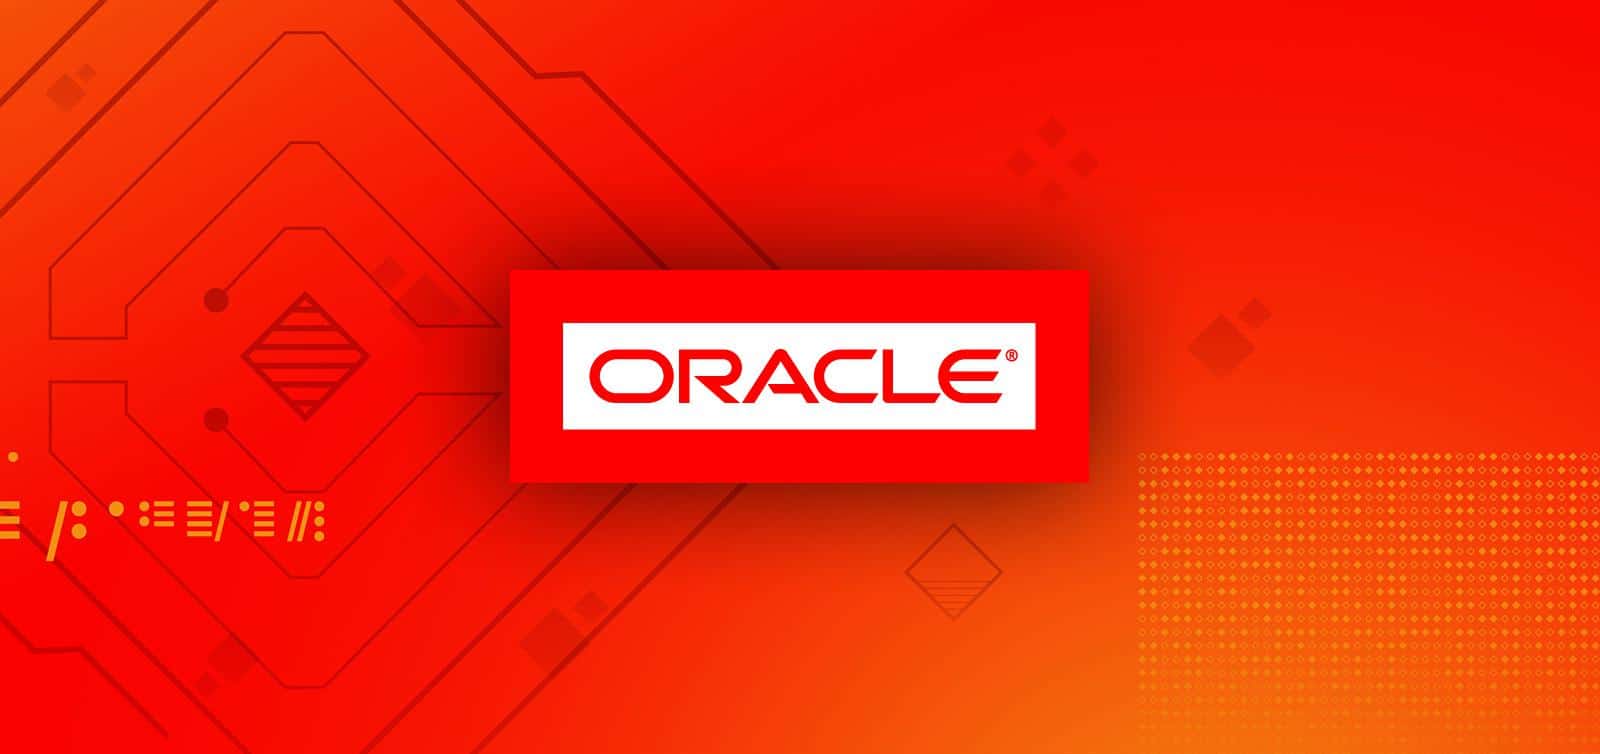 Pre-auth RCE in Oracle Fusion Middleware exploited in the wild (CVE-2021-35587)